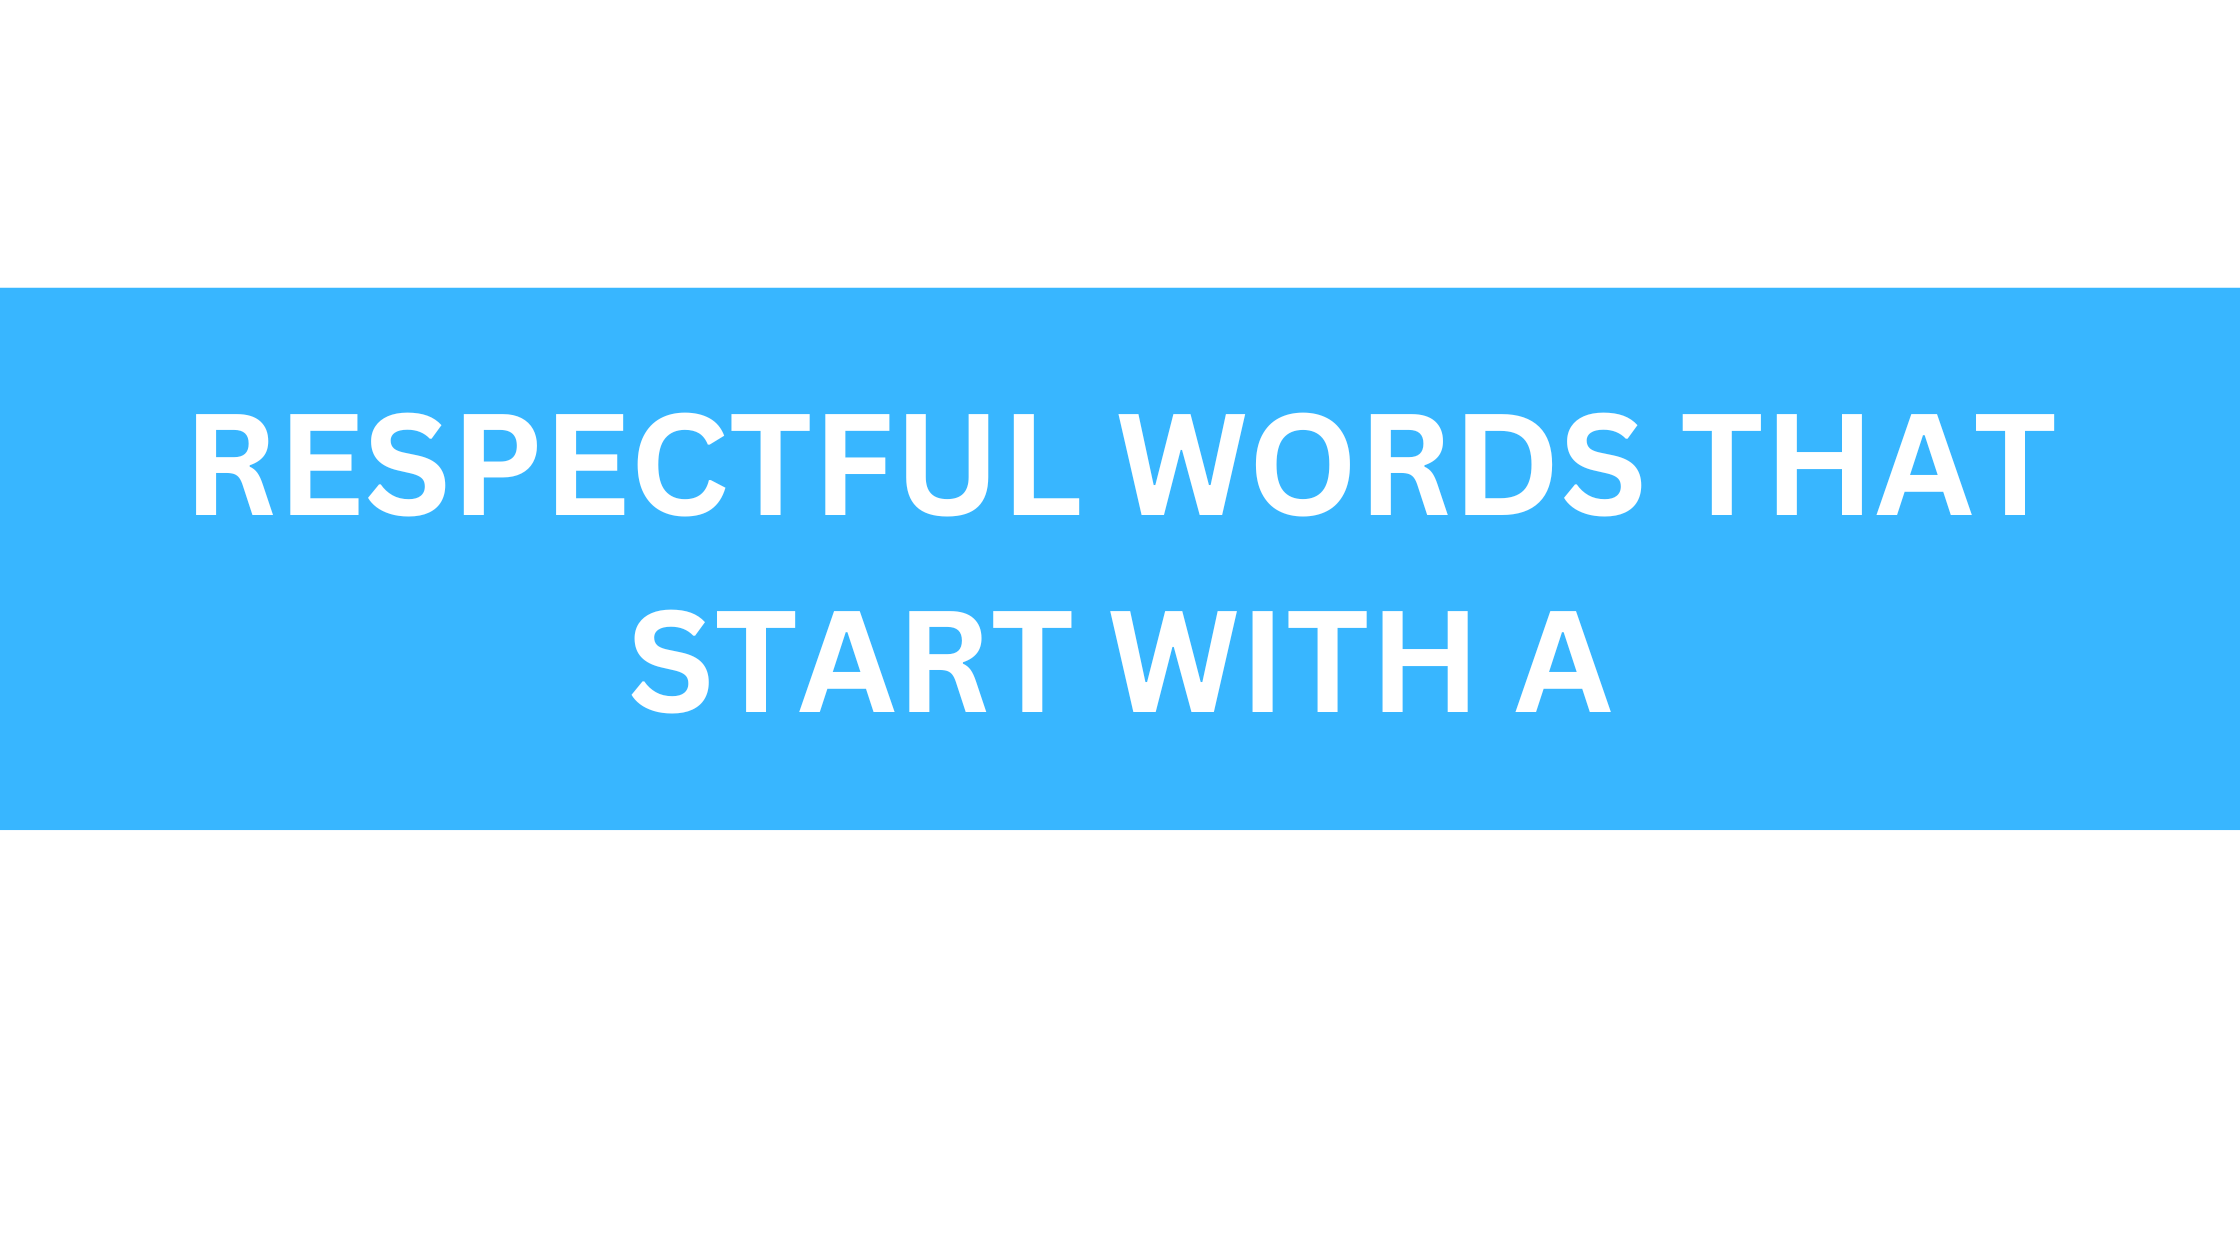 respectful words that start with a